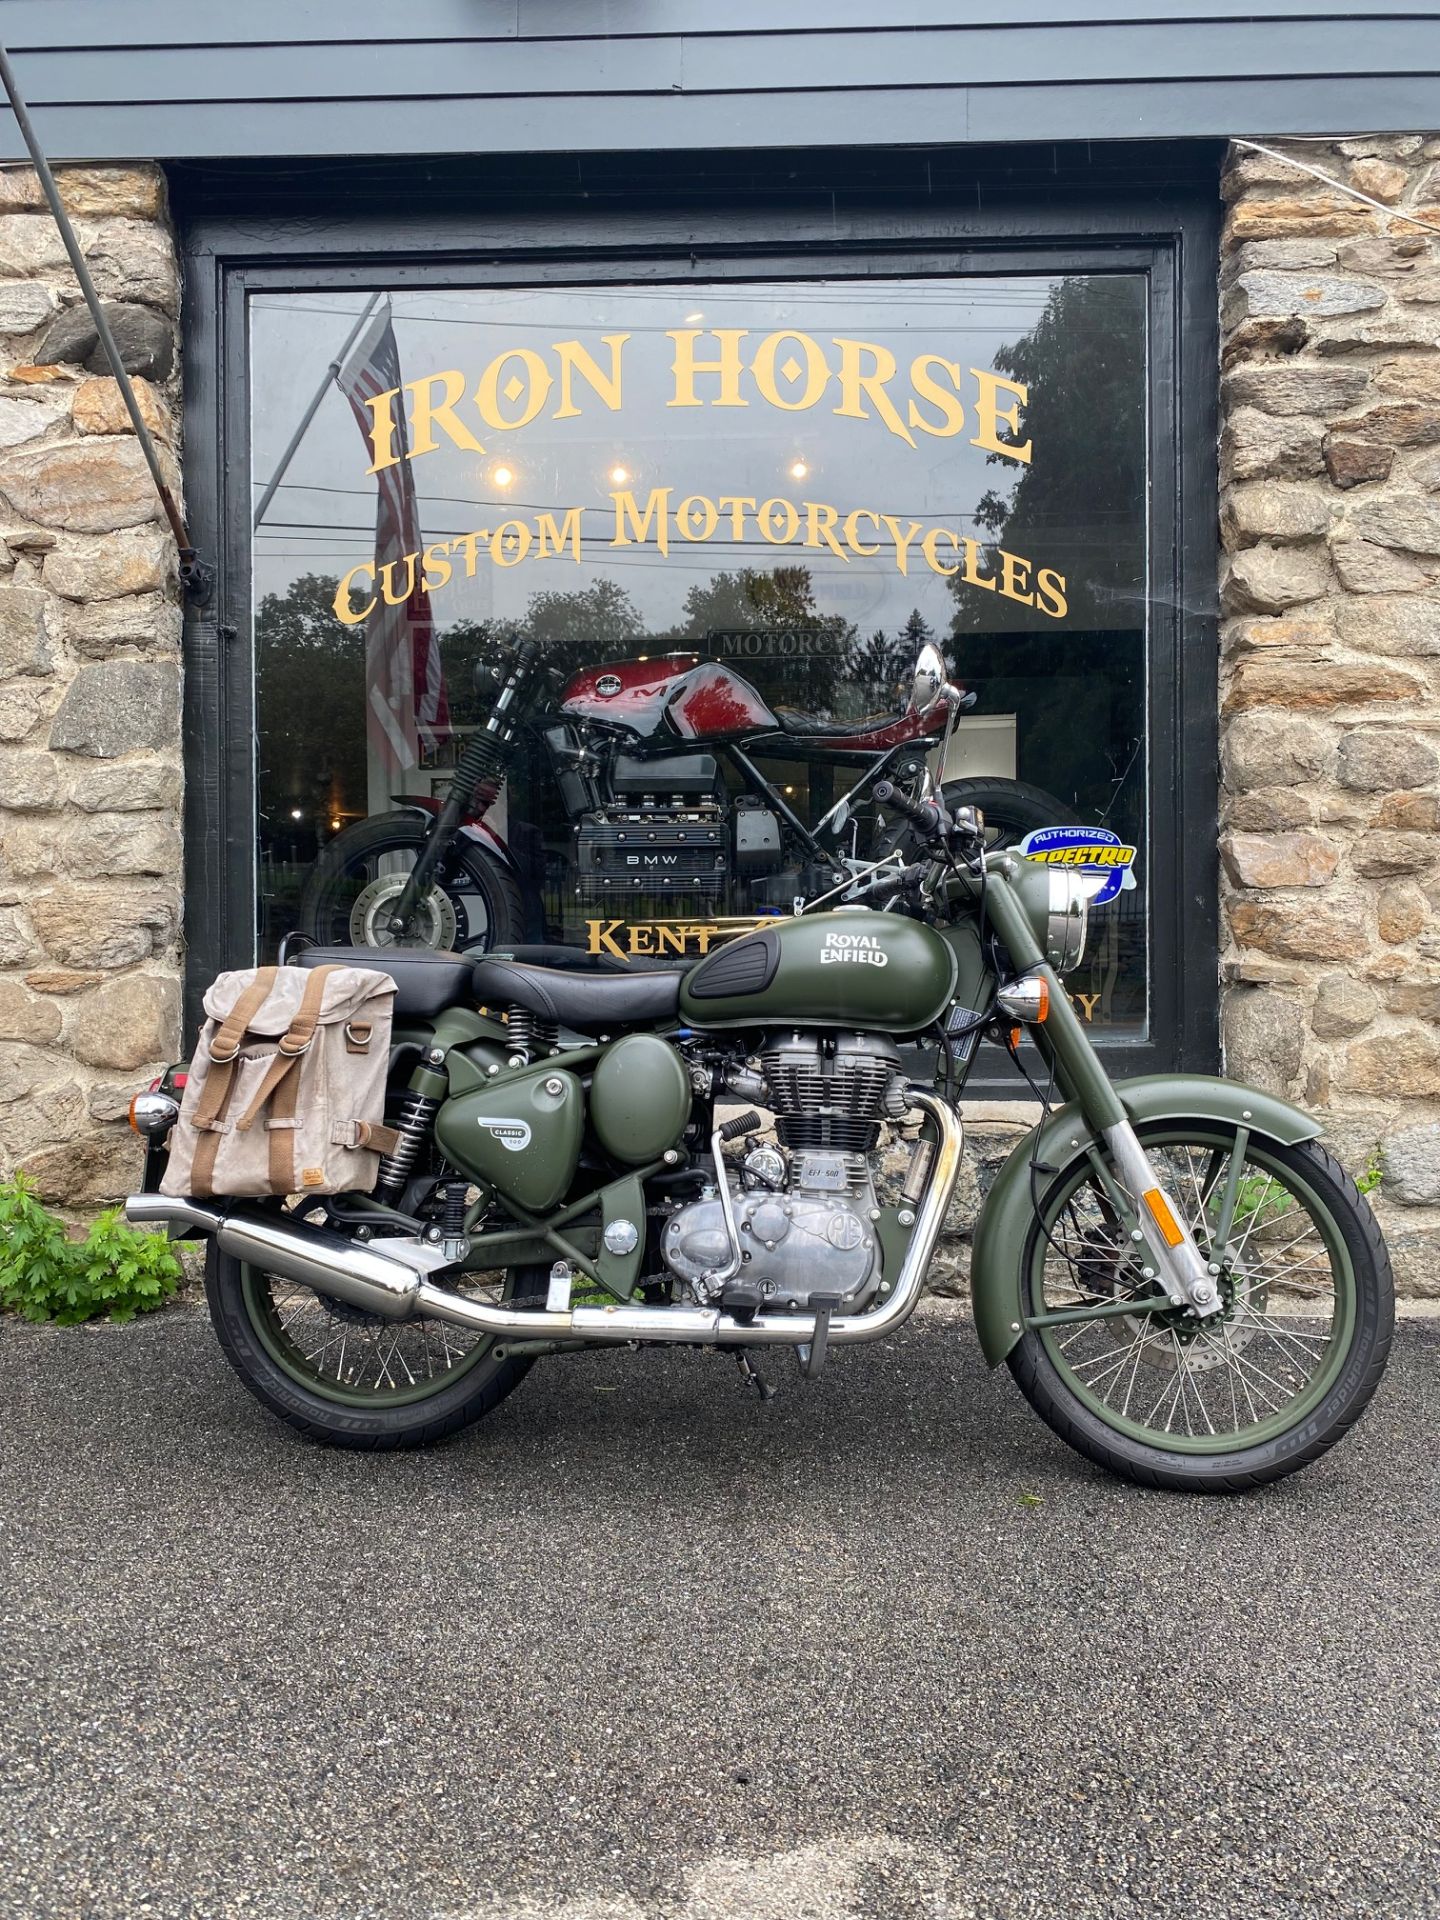 2019 Royal Enfield C500 Military in Kent, Connecticut